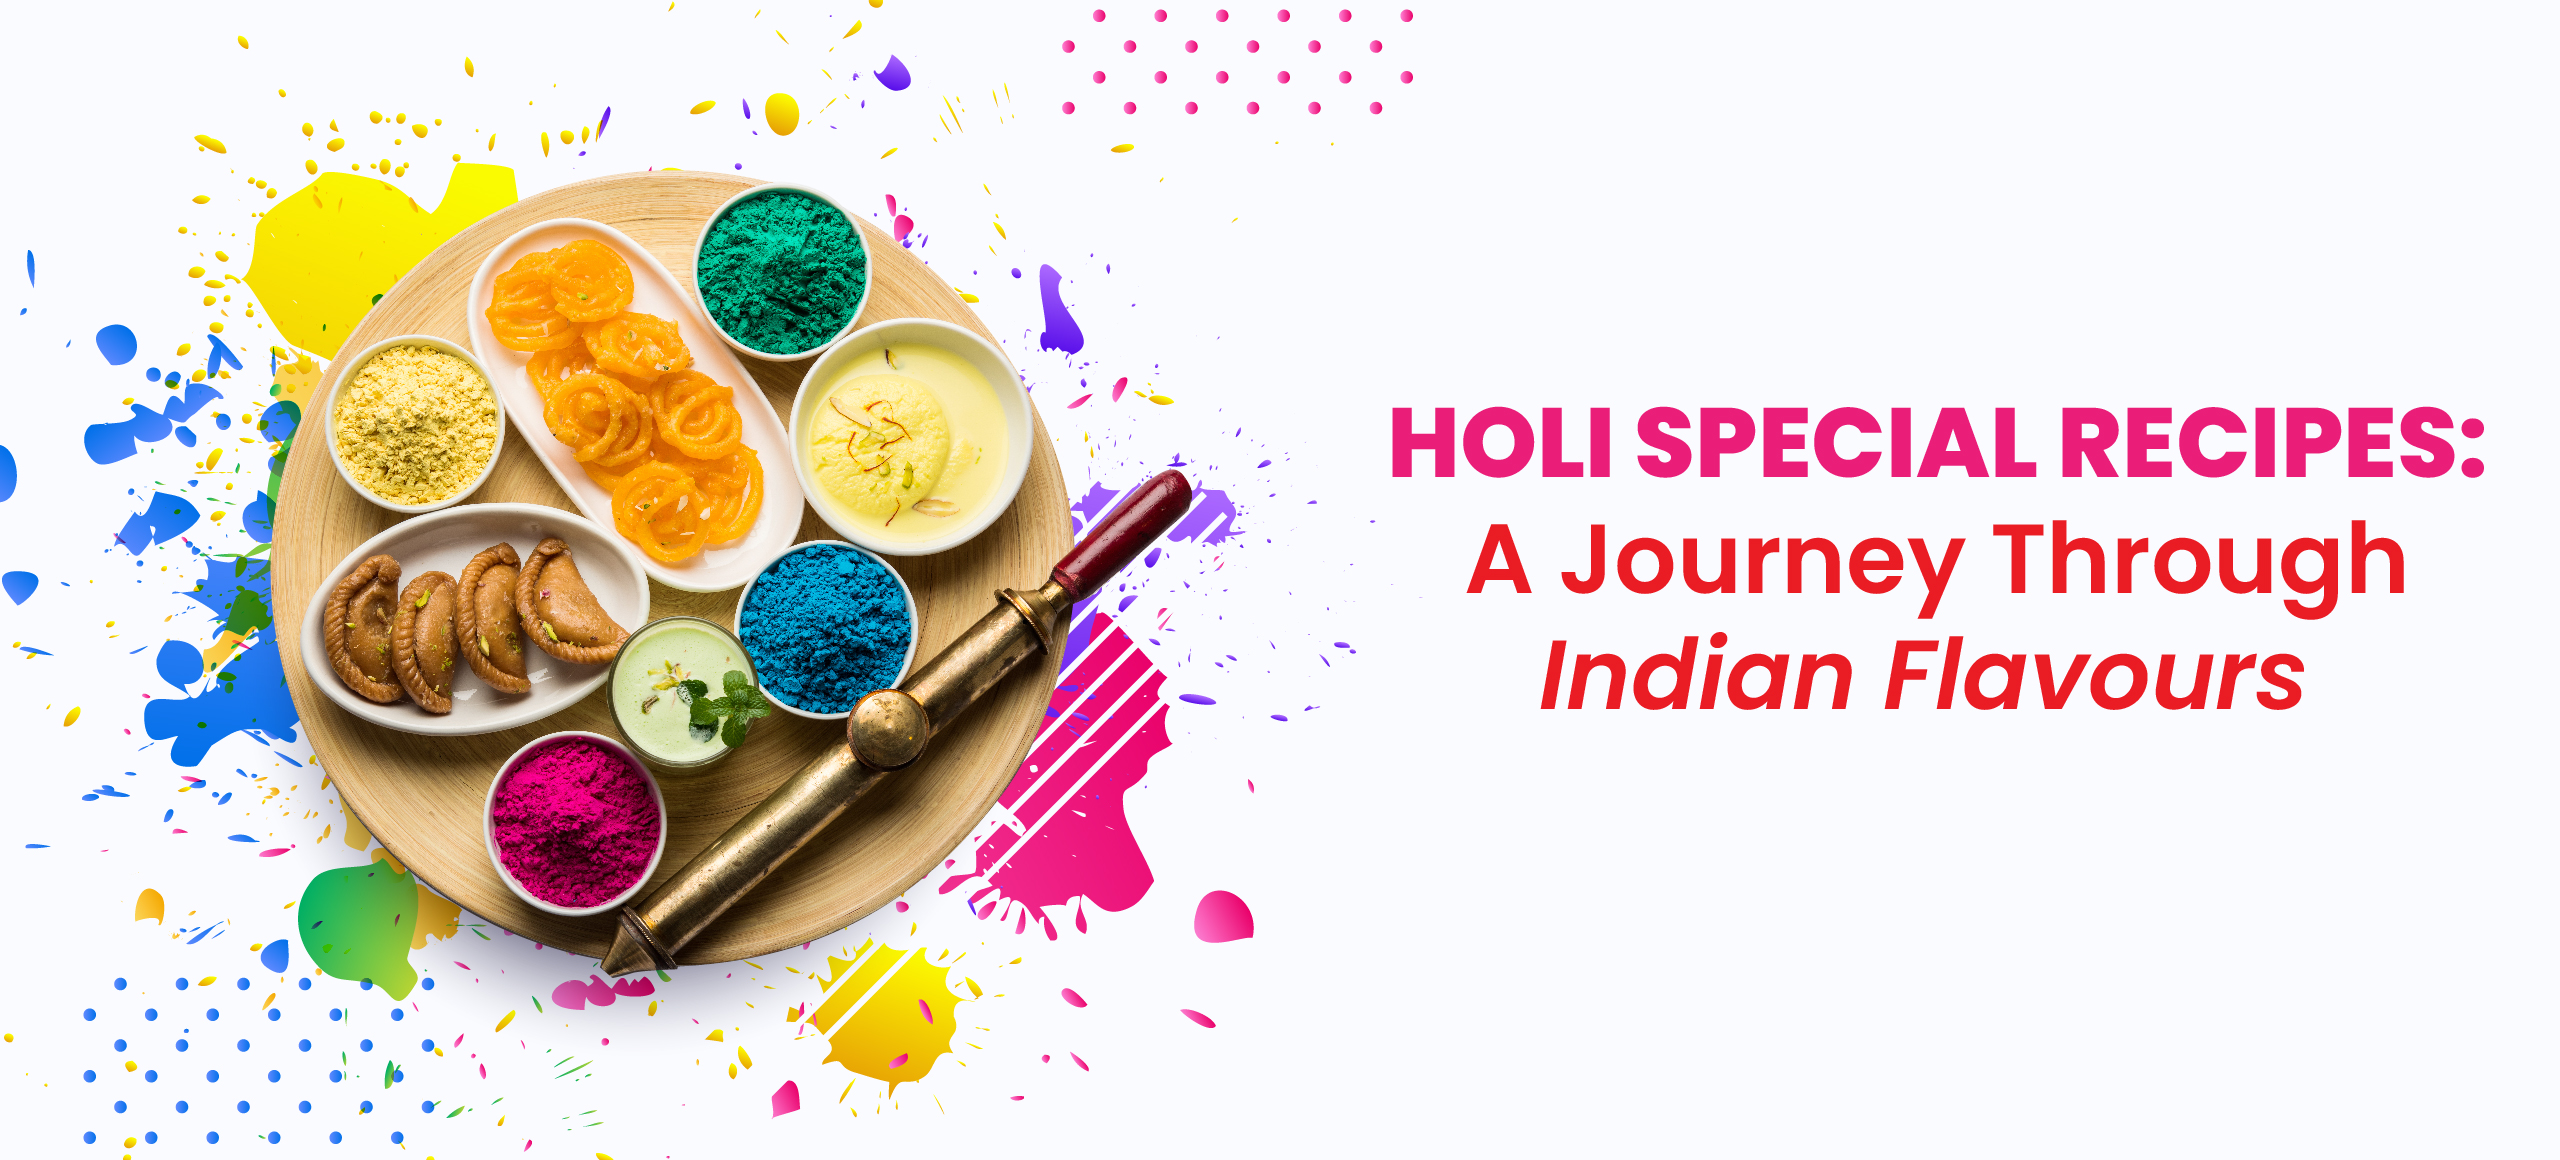 Holi Special Recipe : A journey through indian Flavours